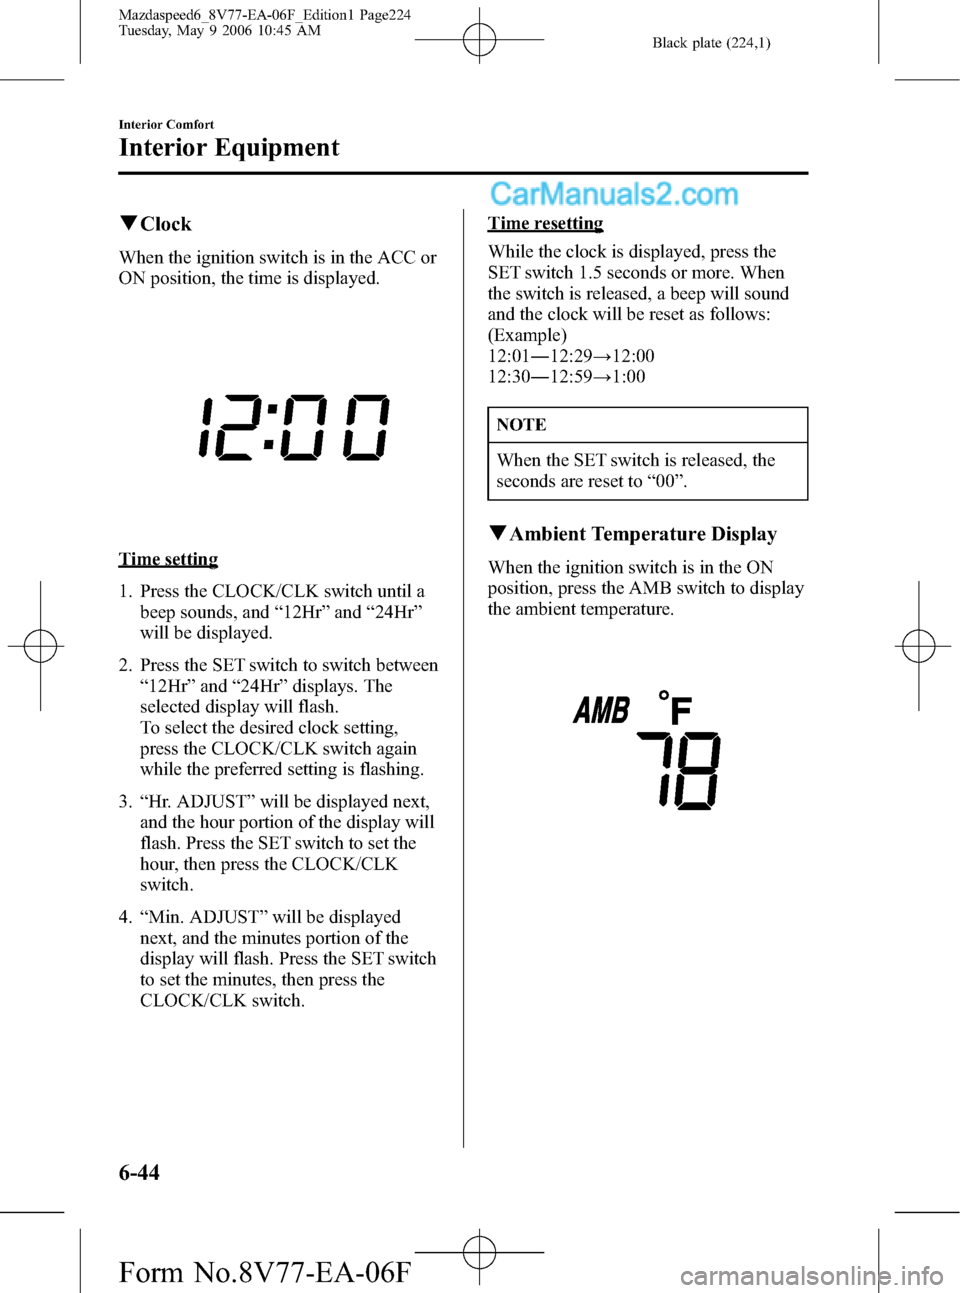 MAZDA MODEL MAZDASPEED 6 2007  Owners Manual (in English) Black plate (224,1)
qClock
When the ignition switch is in the ACC or
ON position, the time is displayed.
Time setting
1. Press the CLOCK/CLK switch until a
beep sounds, and“12Hr”and“24Hr”
will